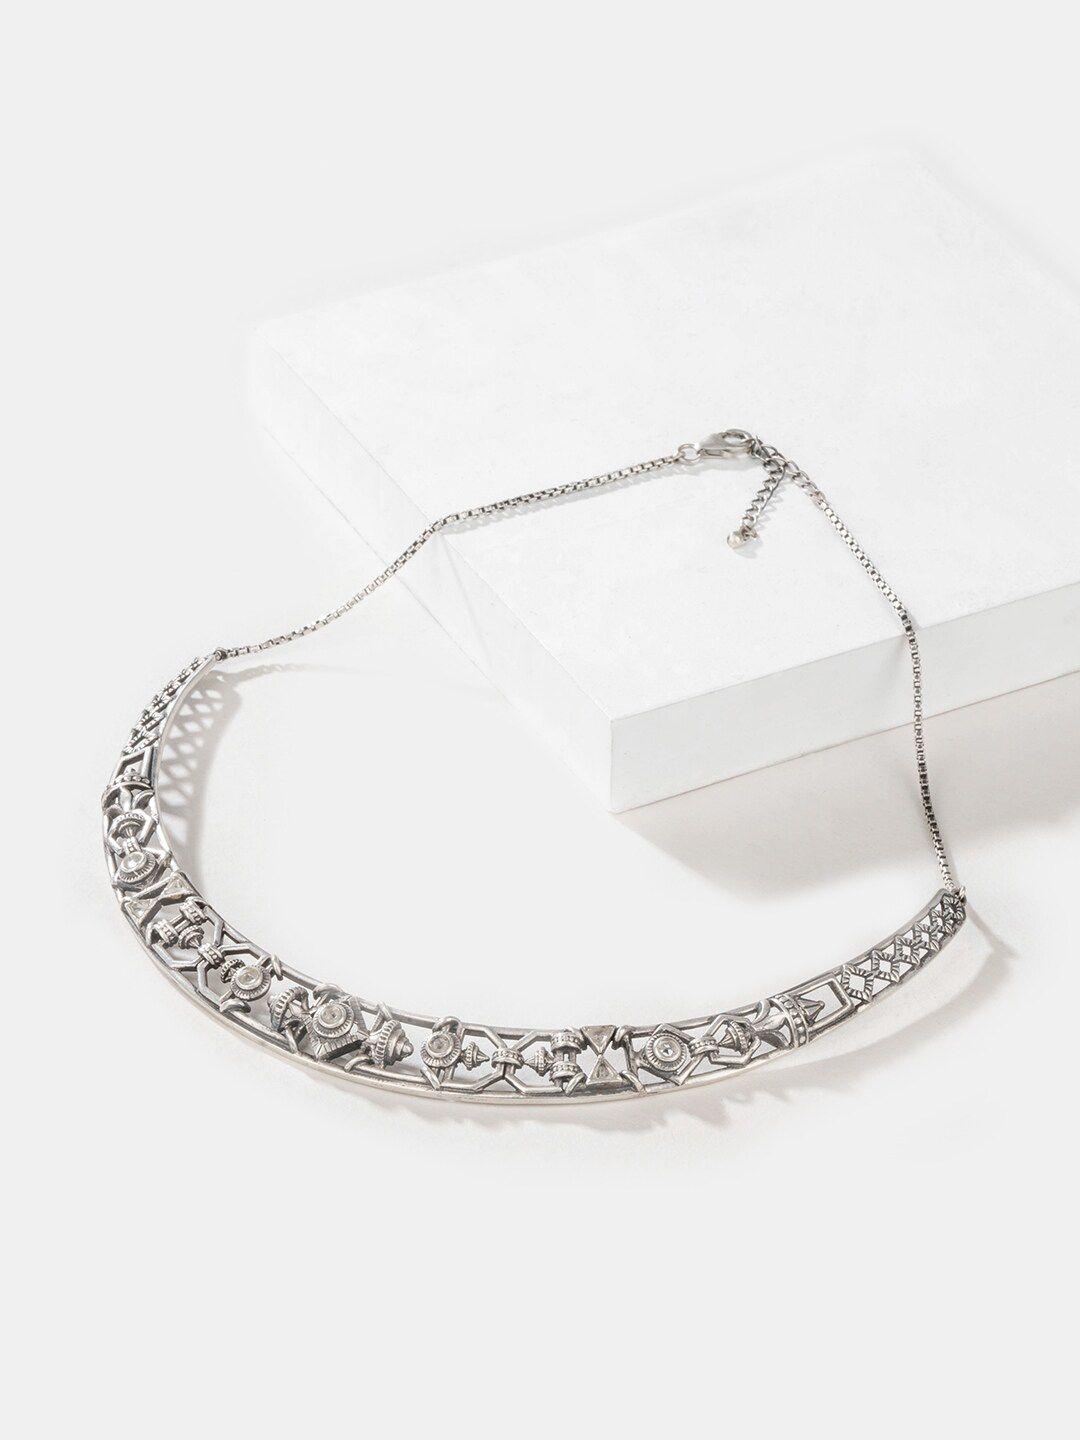 shaya 92.5 sterling silver necklace